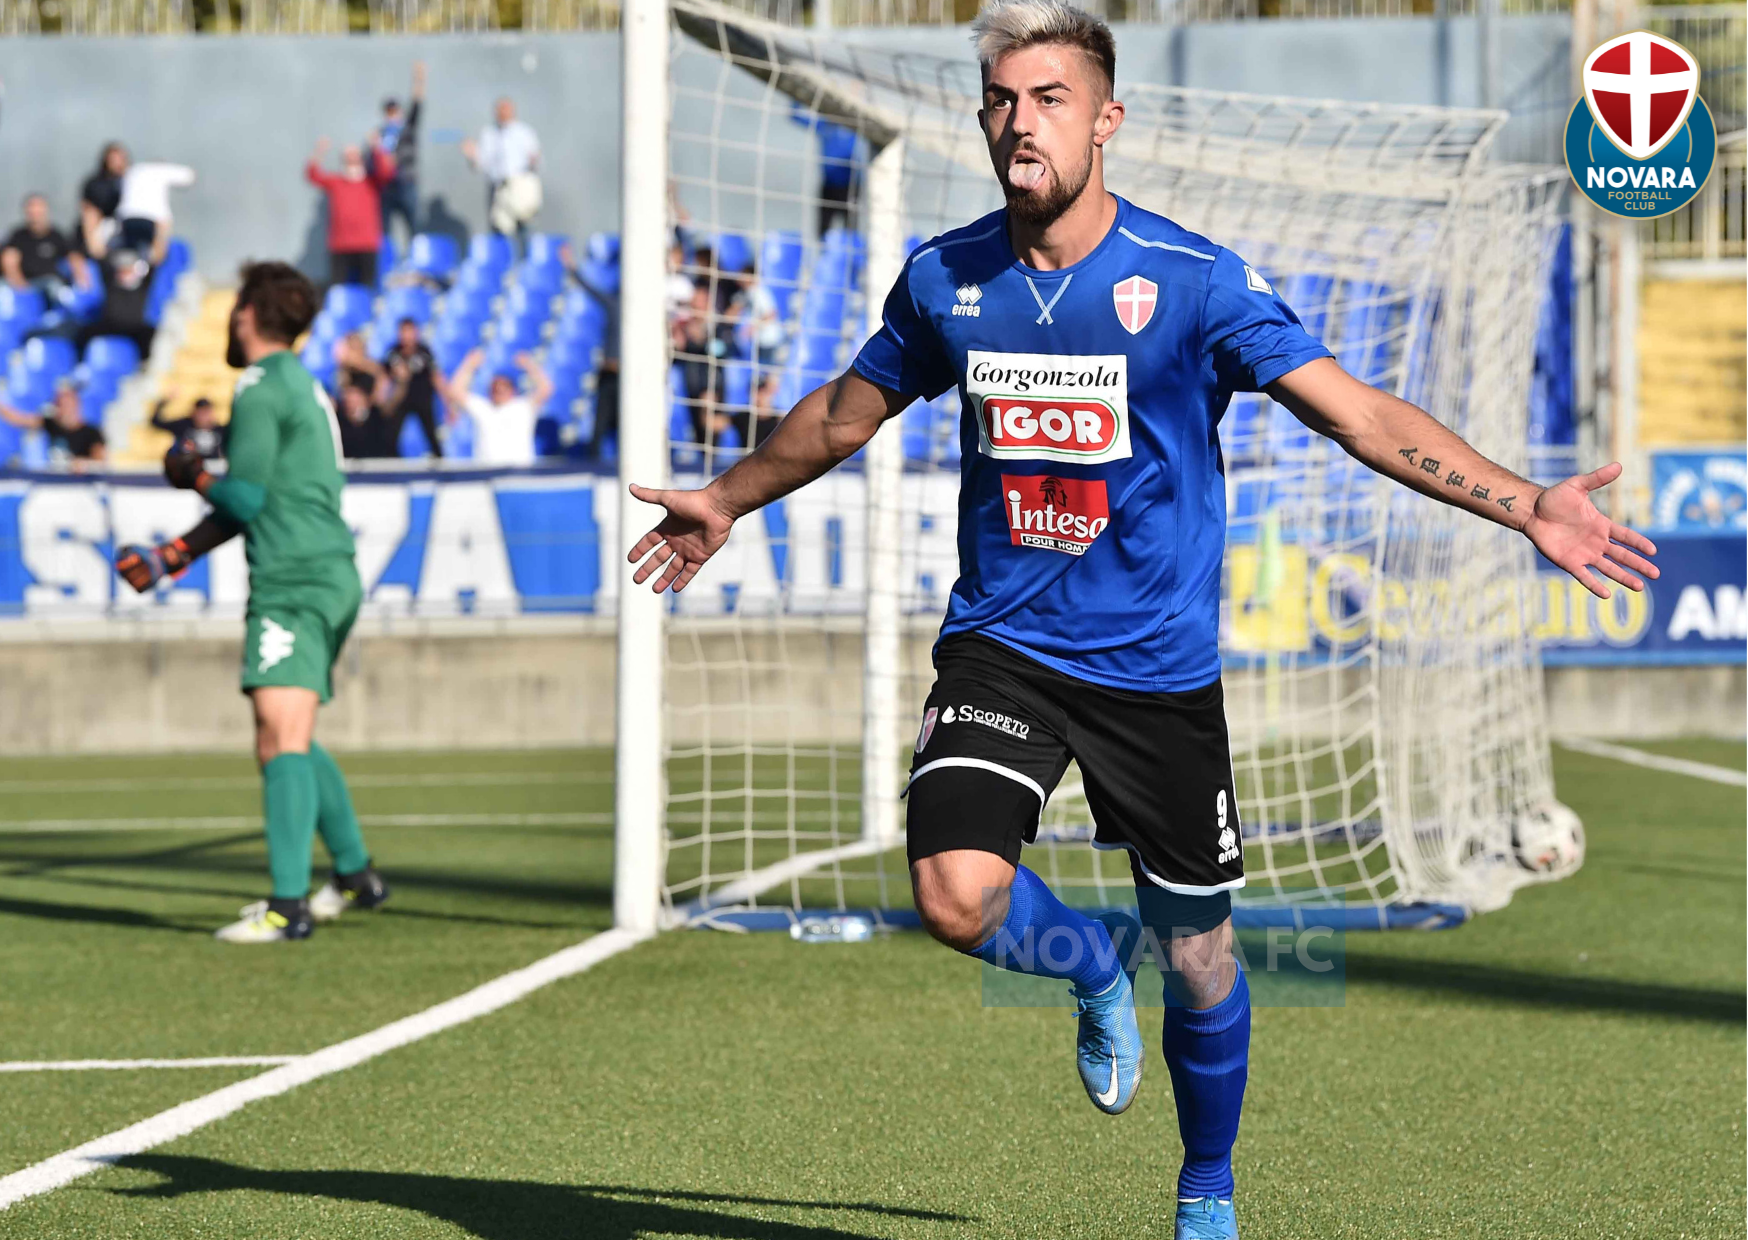 Read more about the article Novara-Bra 2-0 | Gallery